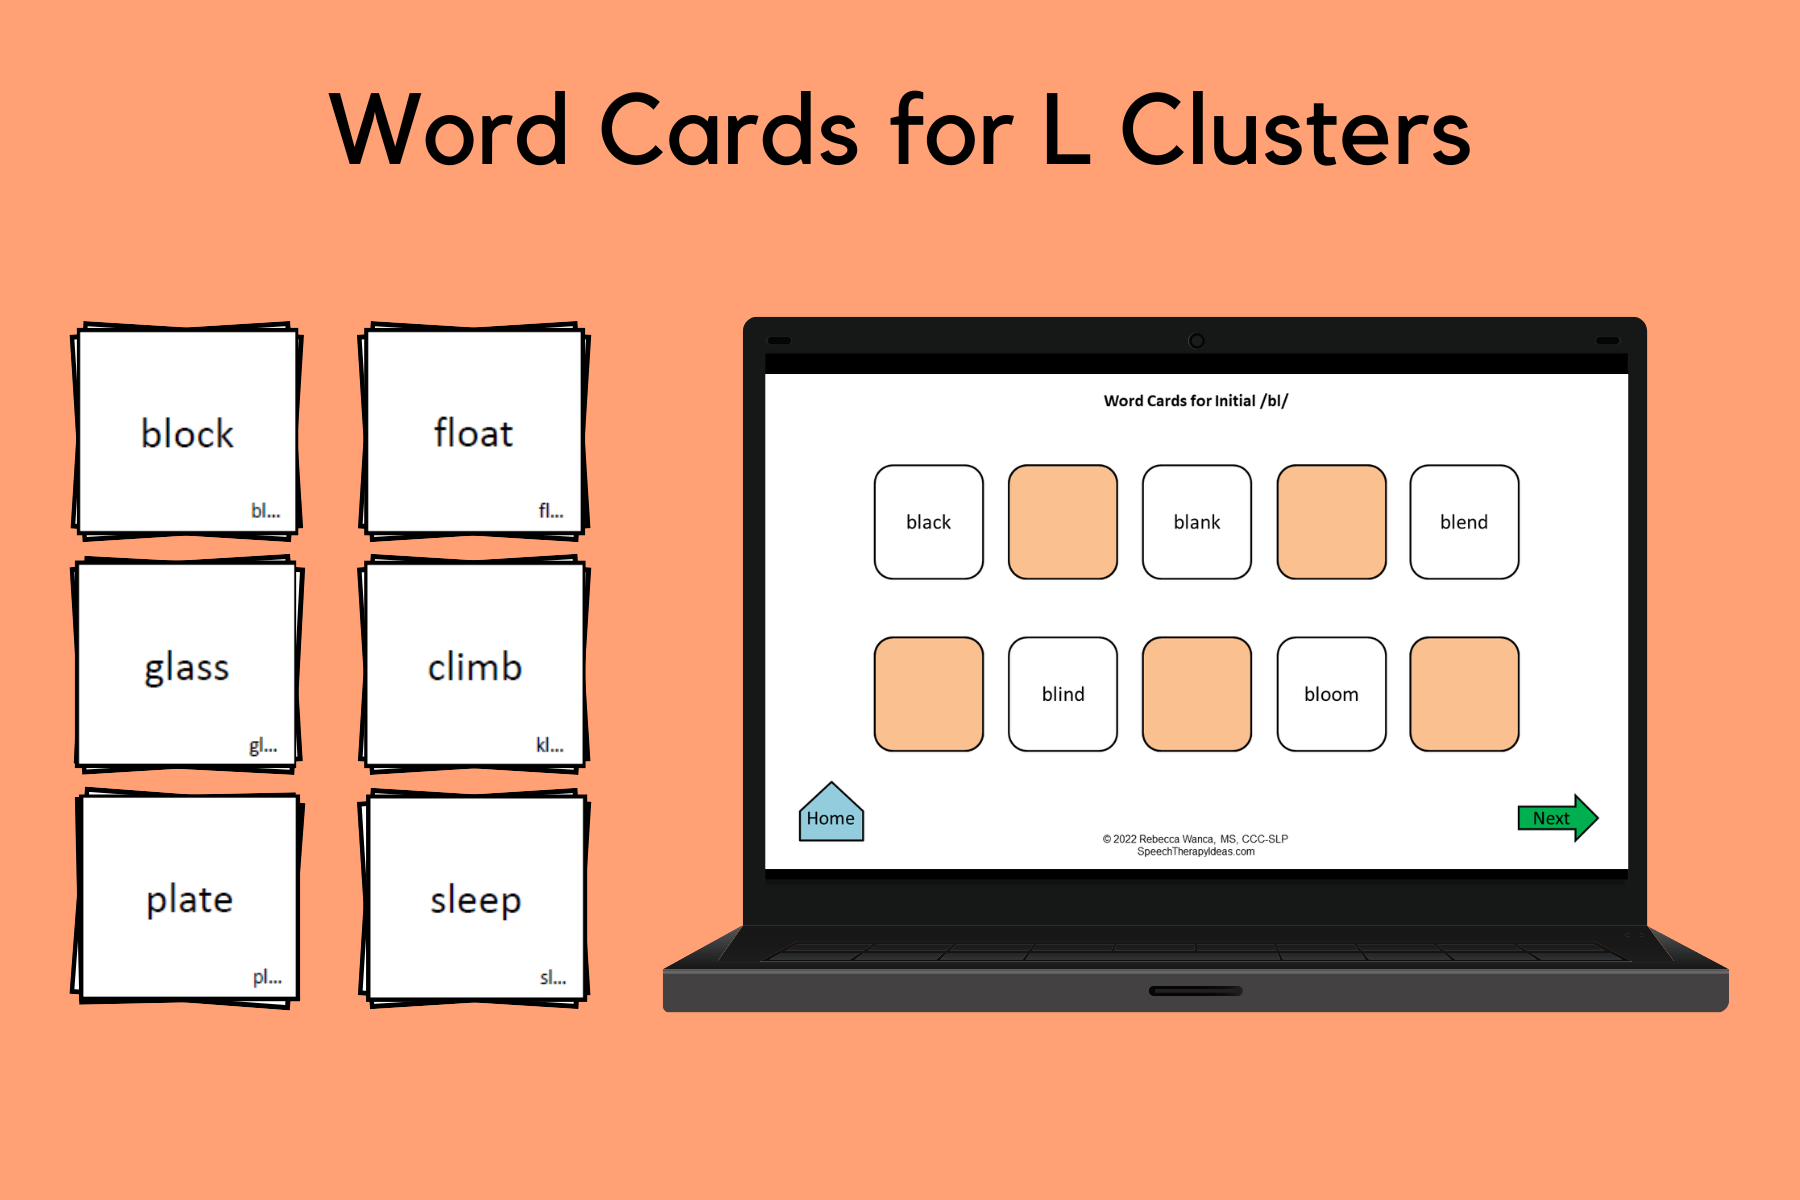 Word Cards for L Clusters